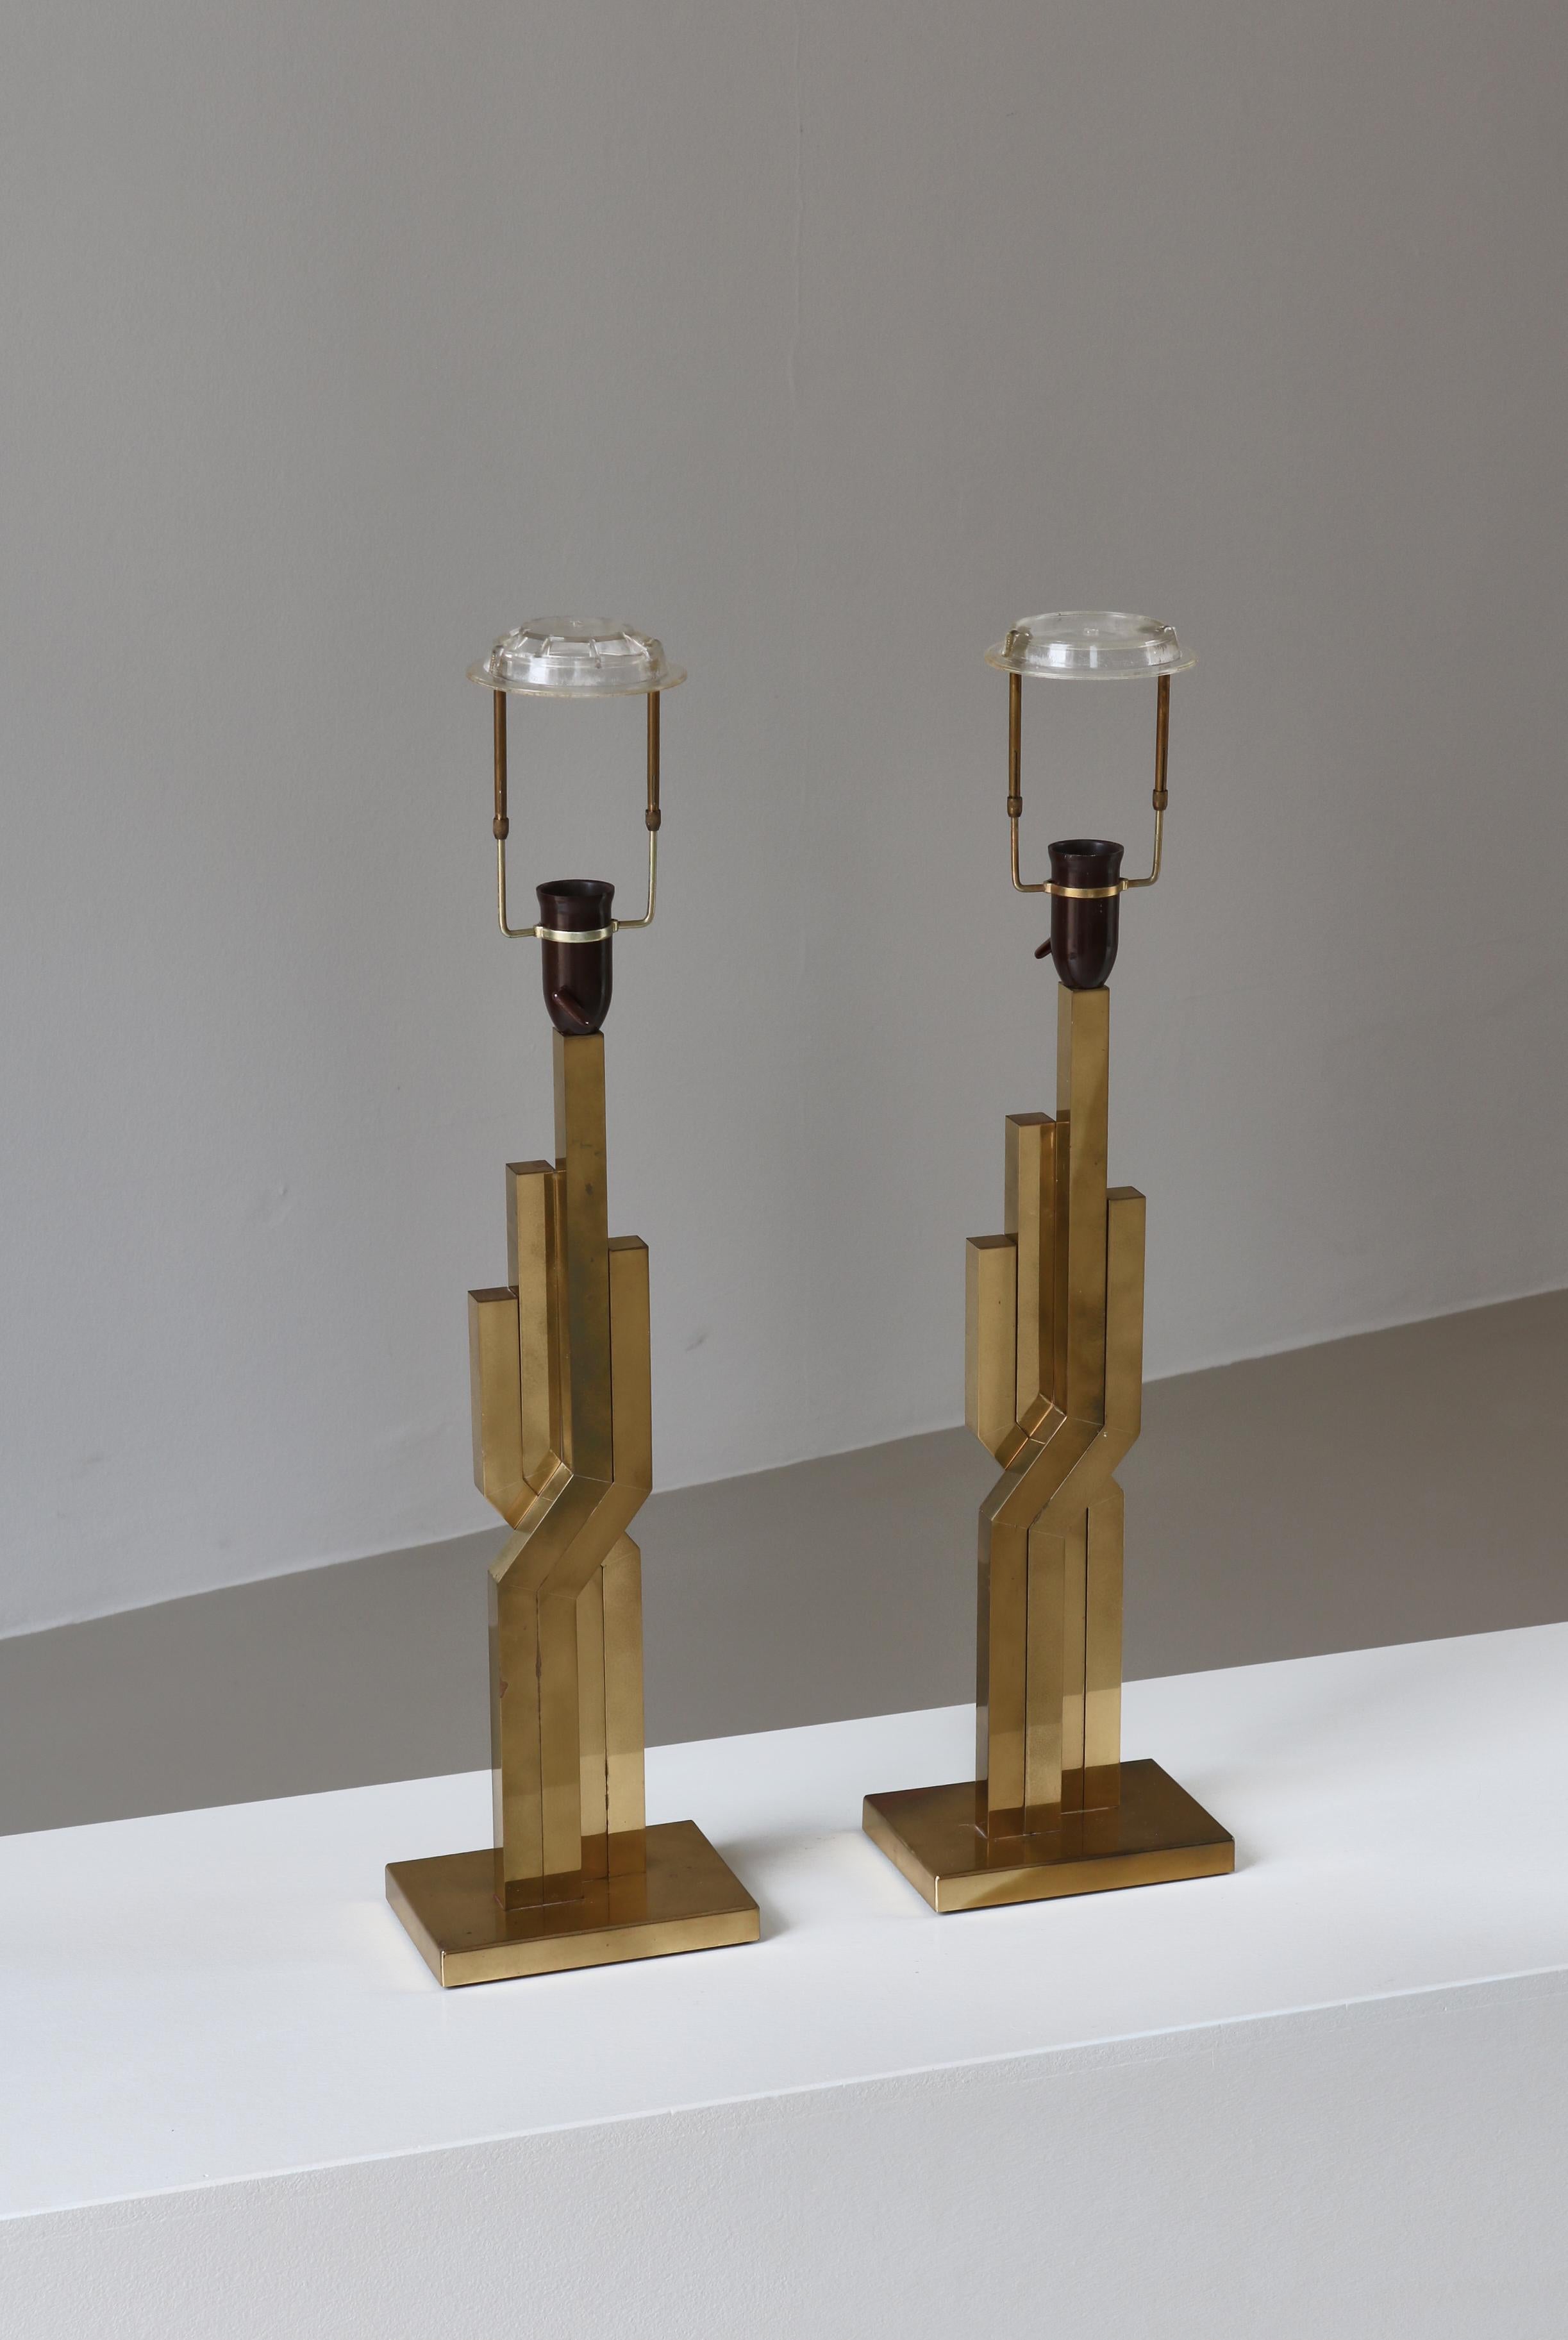 Large Danish Modern Table Lamps in Brass by Svend Aage Holm-Sørensen, 1960s For Sale 12